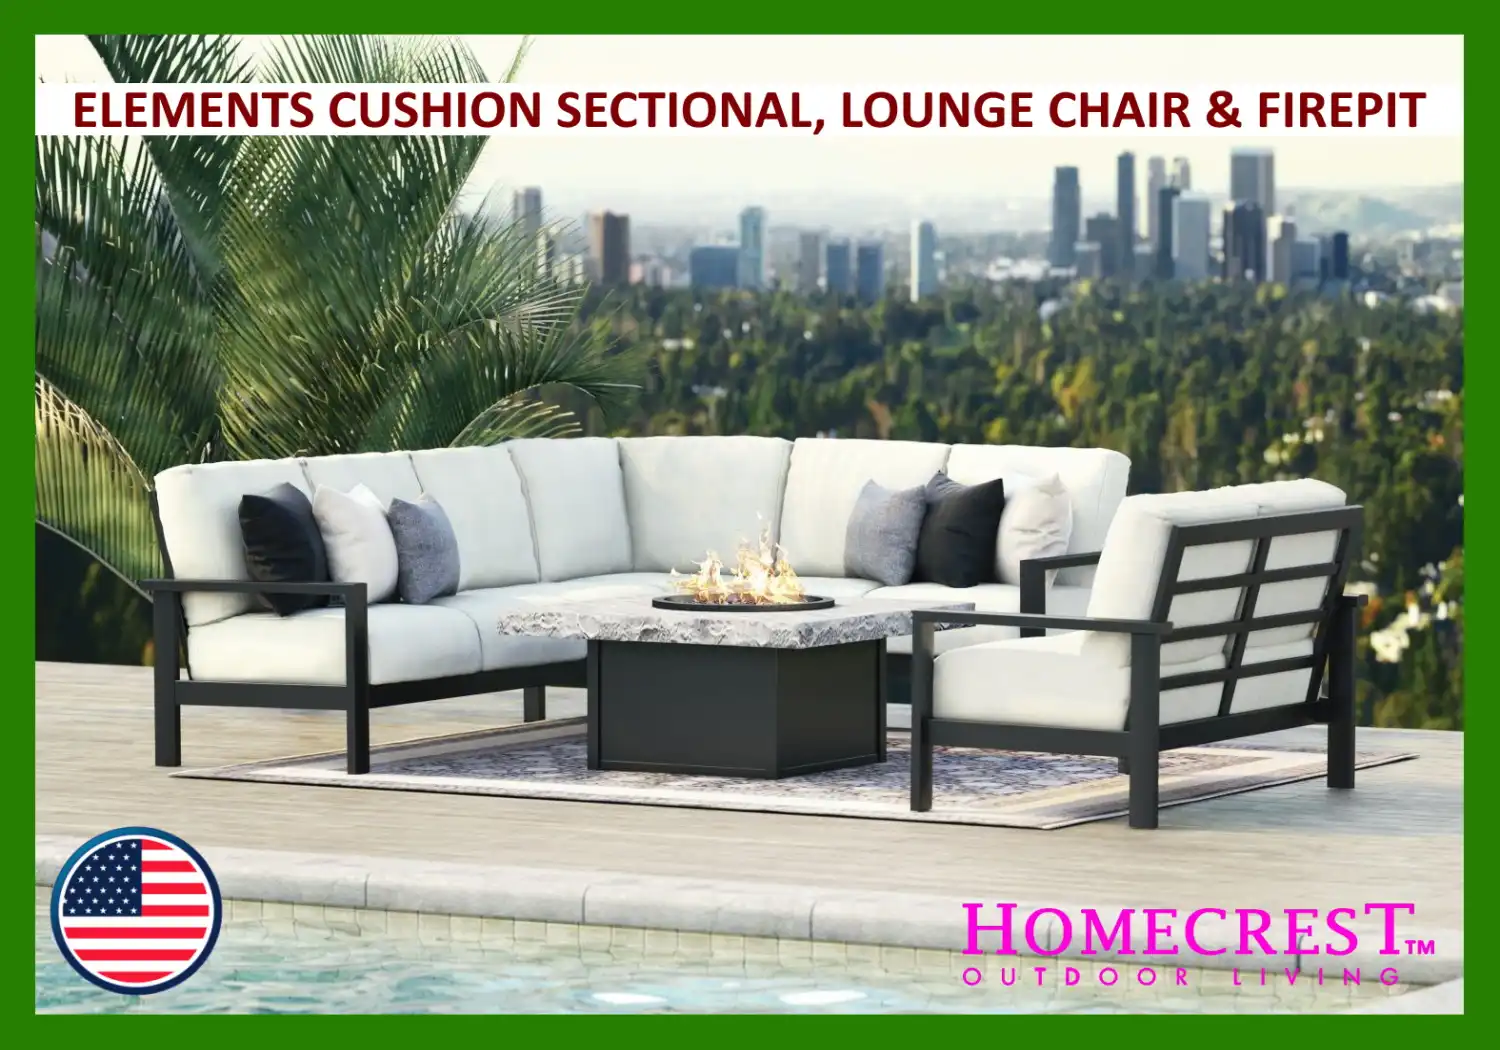 ELEMENTS CUSHION SECTIONAL, LOUNGE CHAIR & FIREPIT